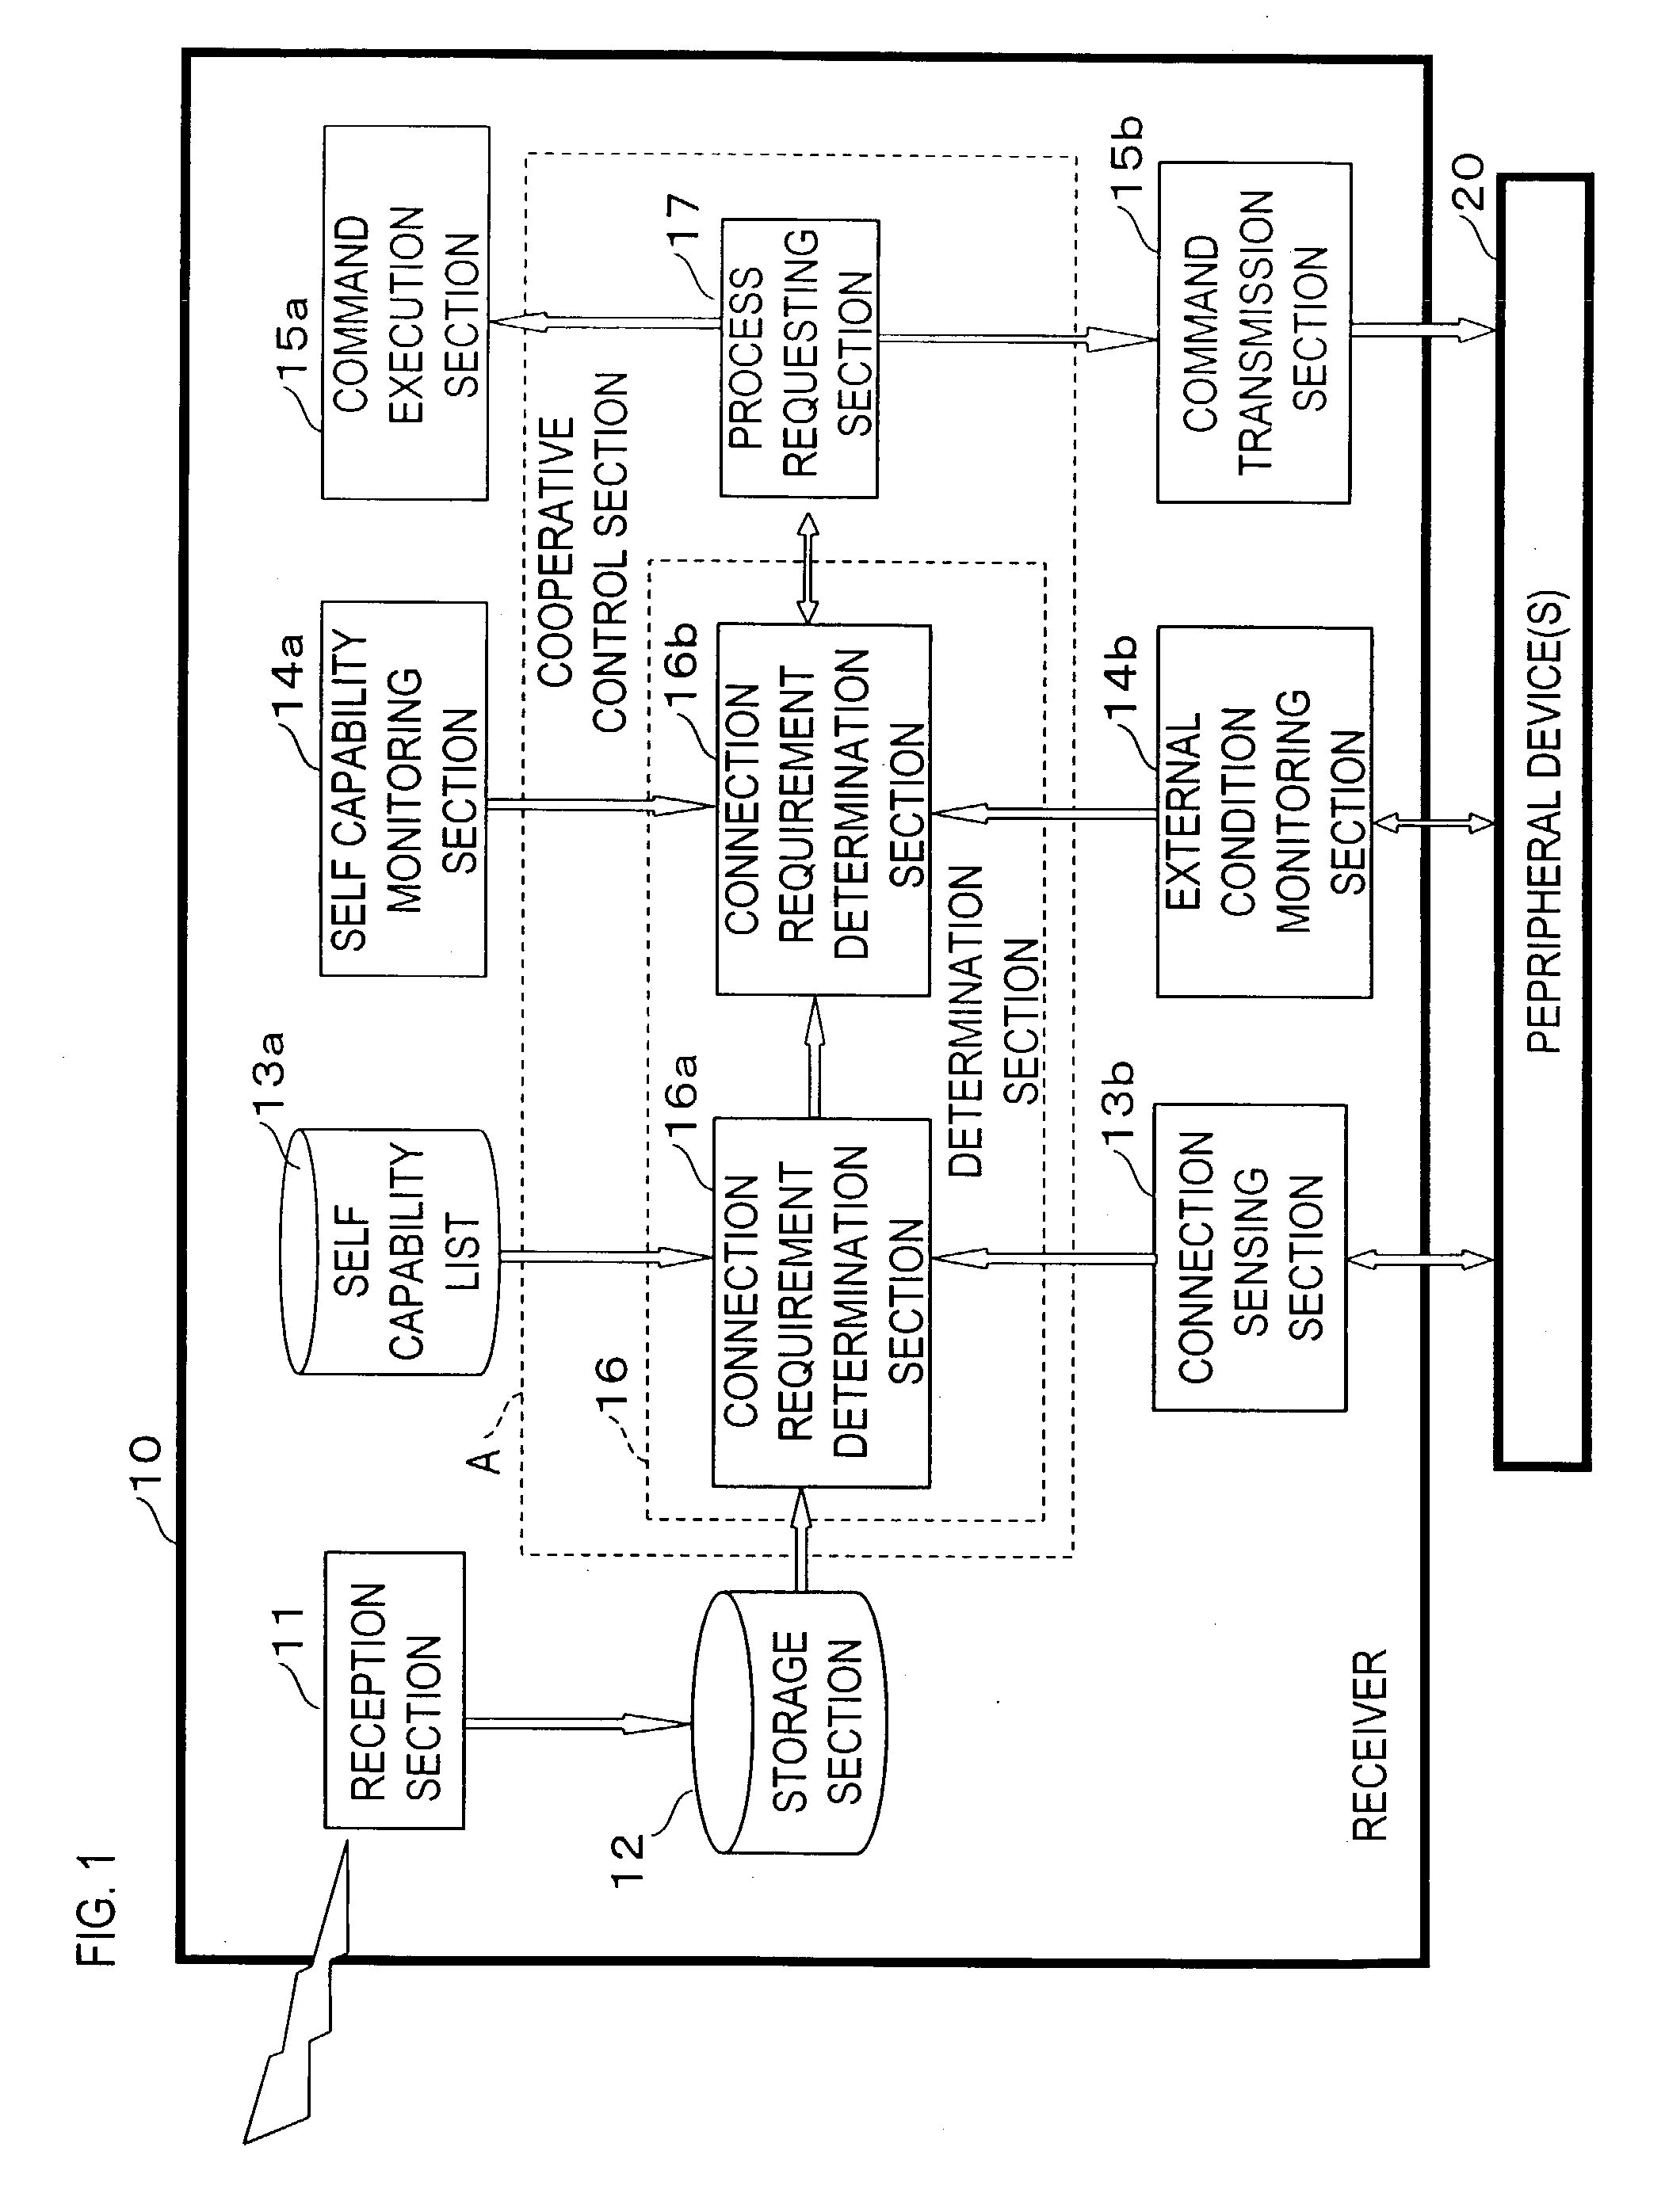 Transmitter, receiver, and broadcasting system